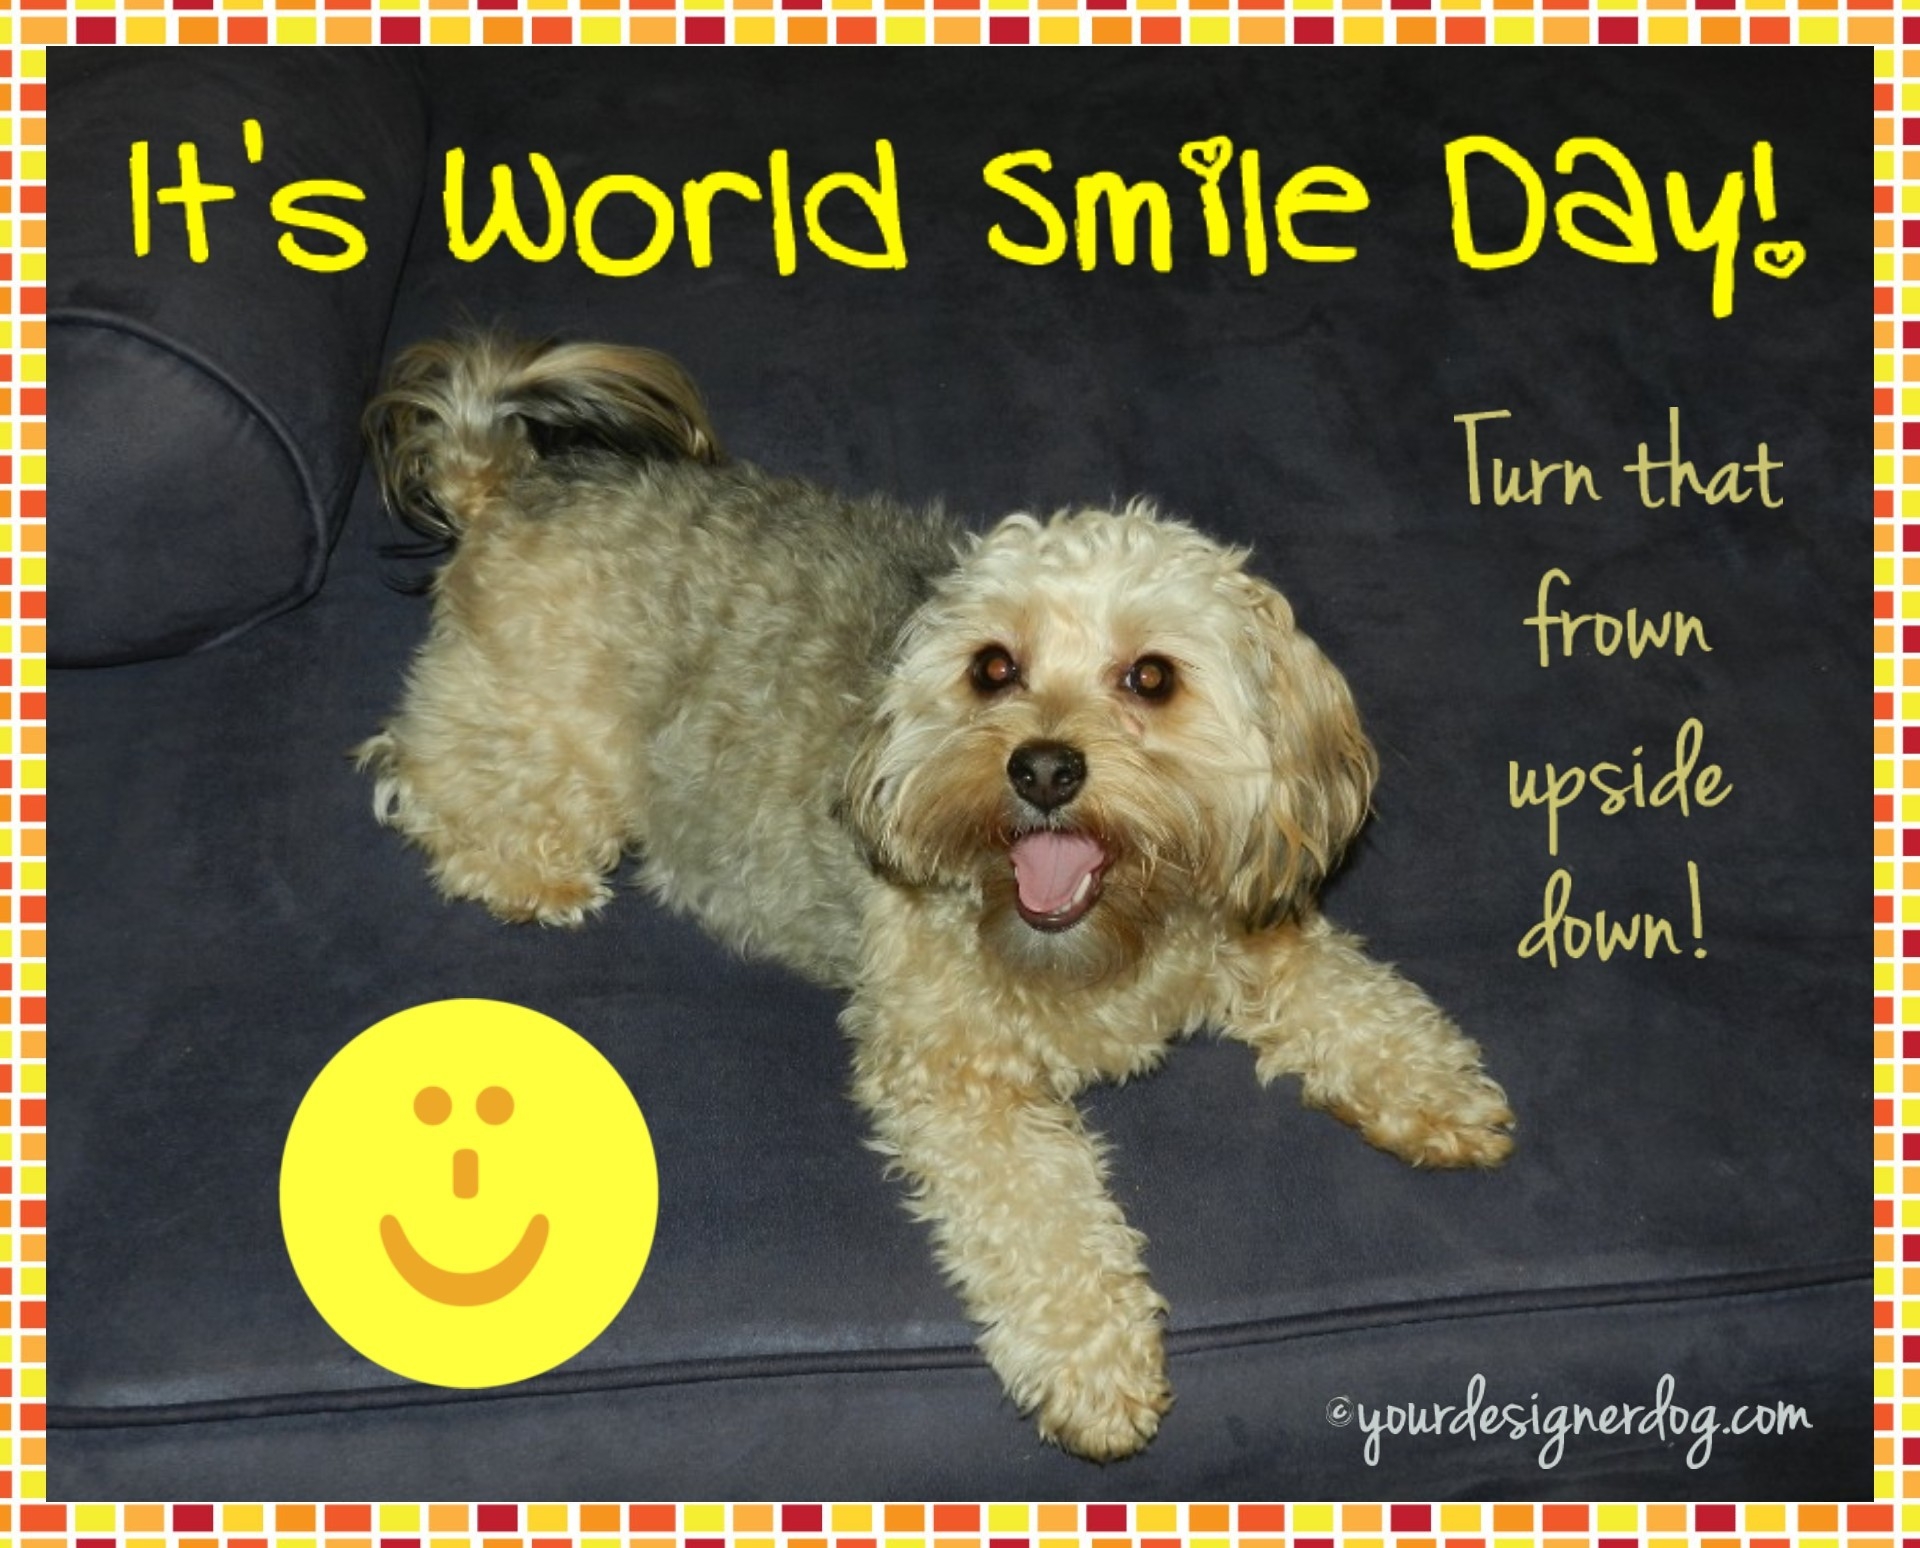 dogs, designer dogs, yorkipoo, yorkie poo, world smile day, dogs smiling